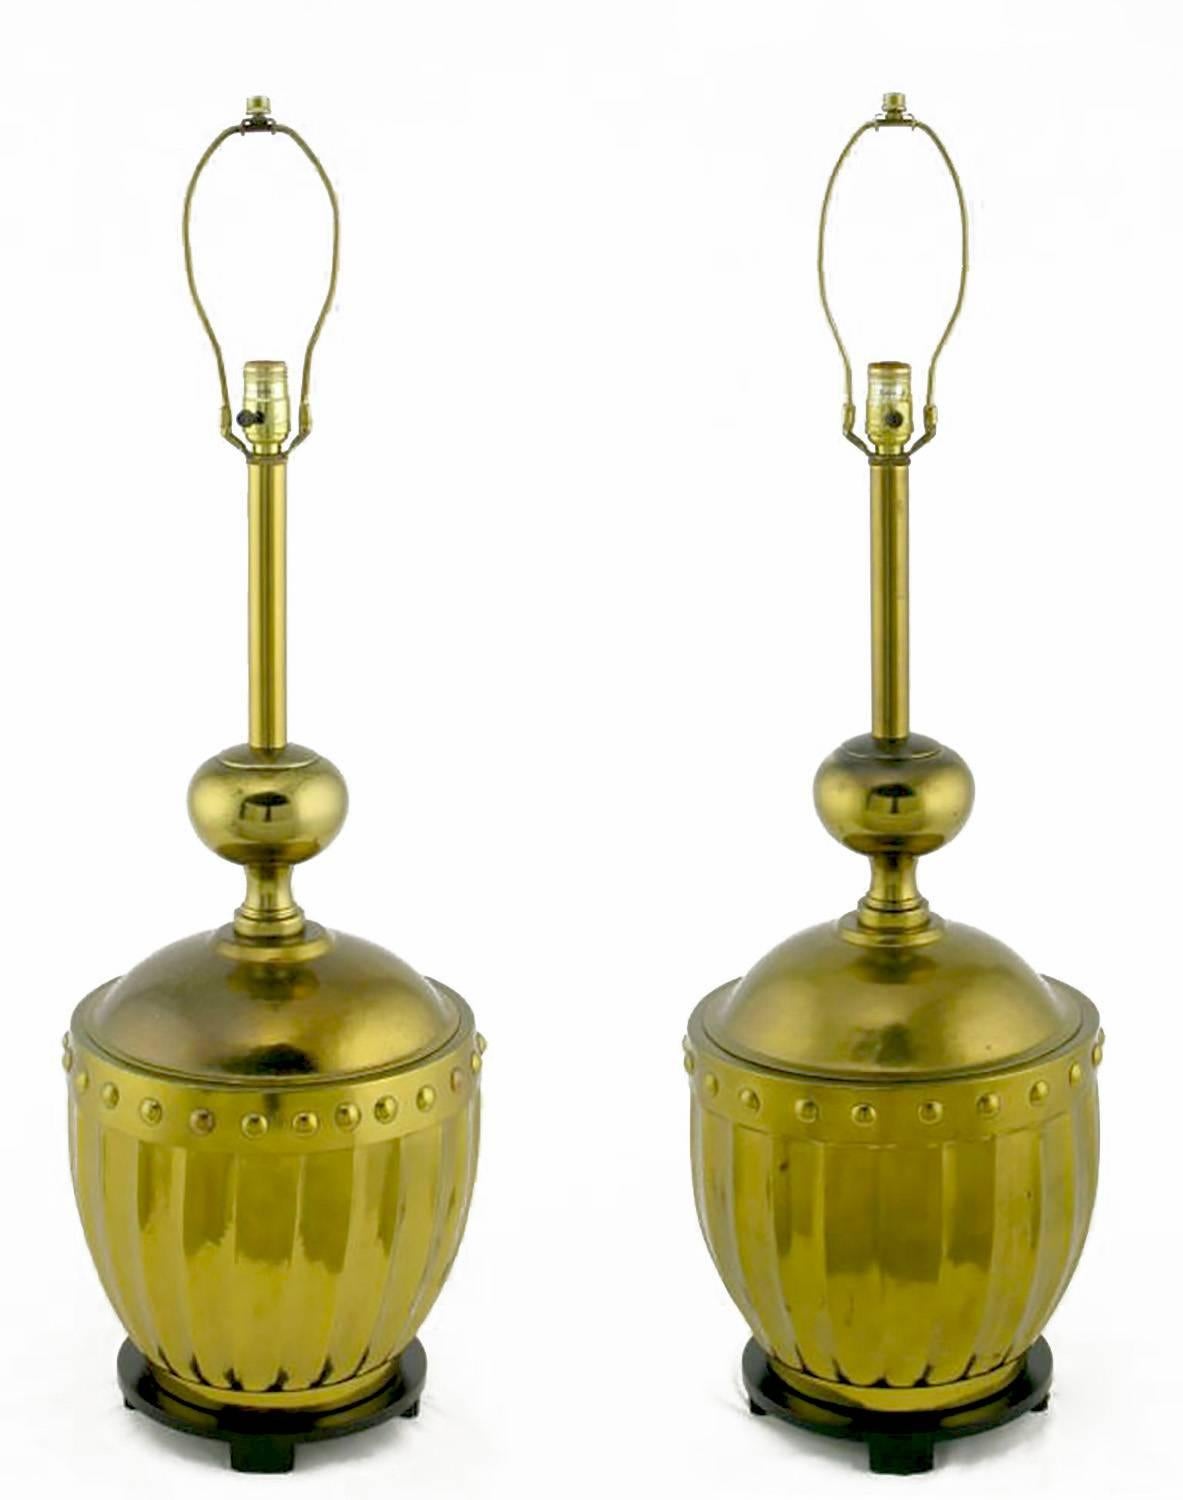 Large studded and fluted brass table lamps from the best years of Stiffel, the fine lamp maker. Black lacquered bases feature subtle chamfered feet. Surmounting the brass urns are brass post and ball columns. Sold sans shades.